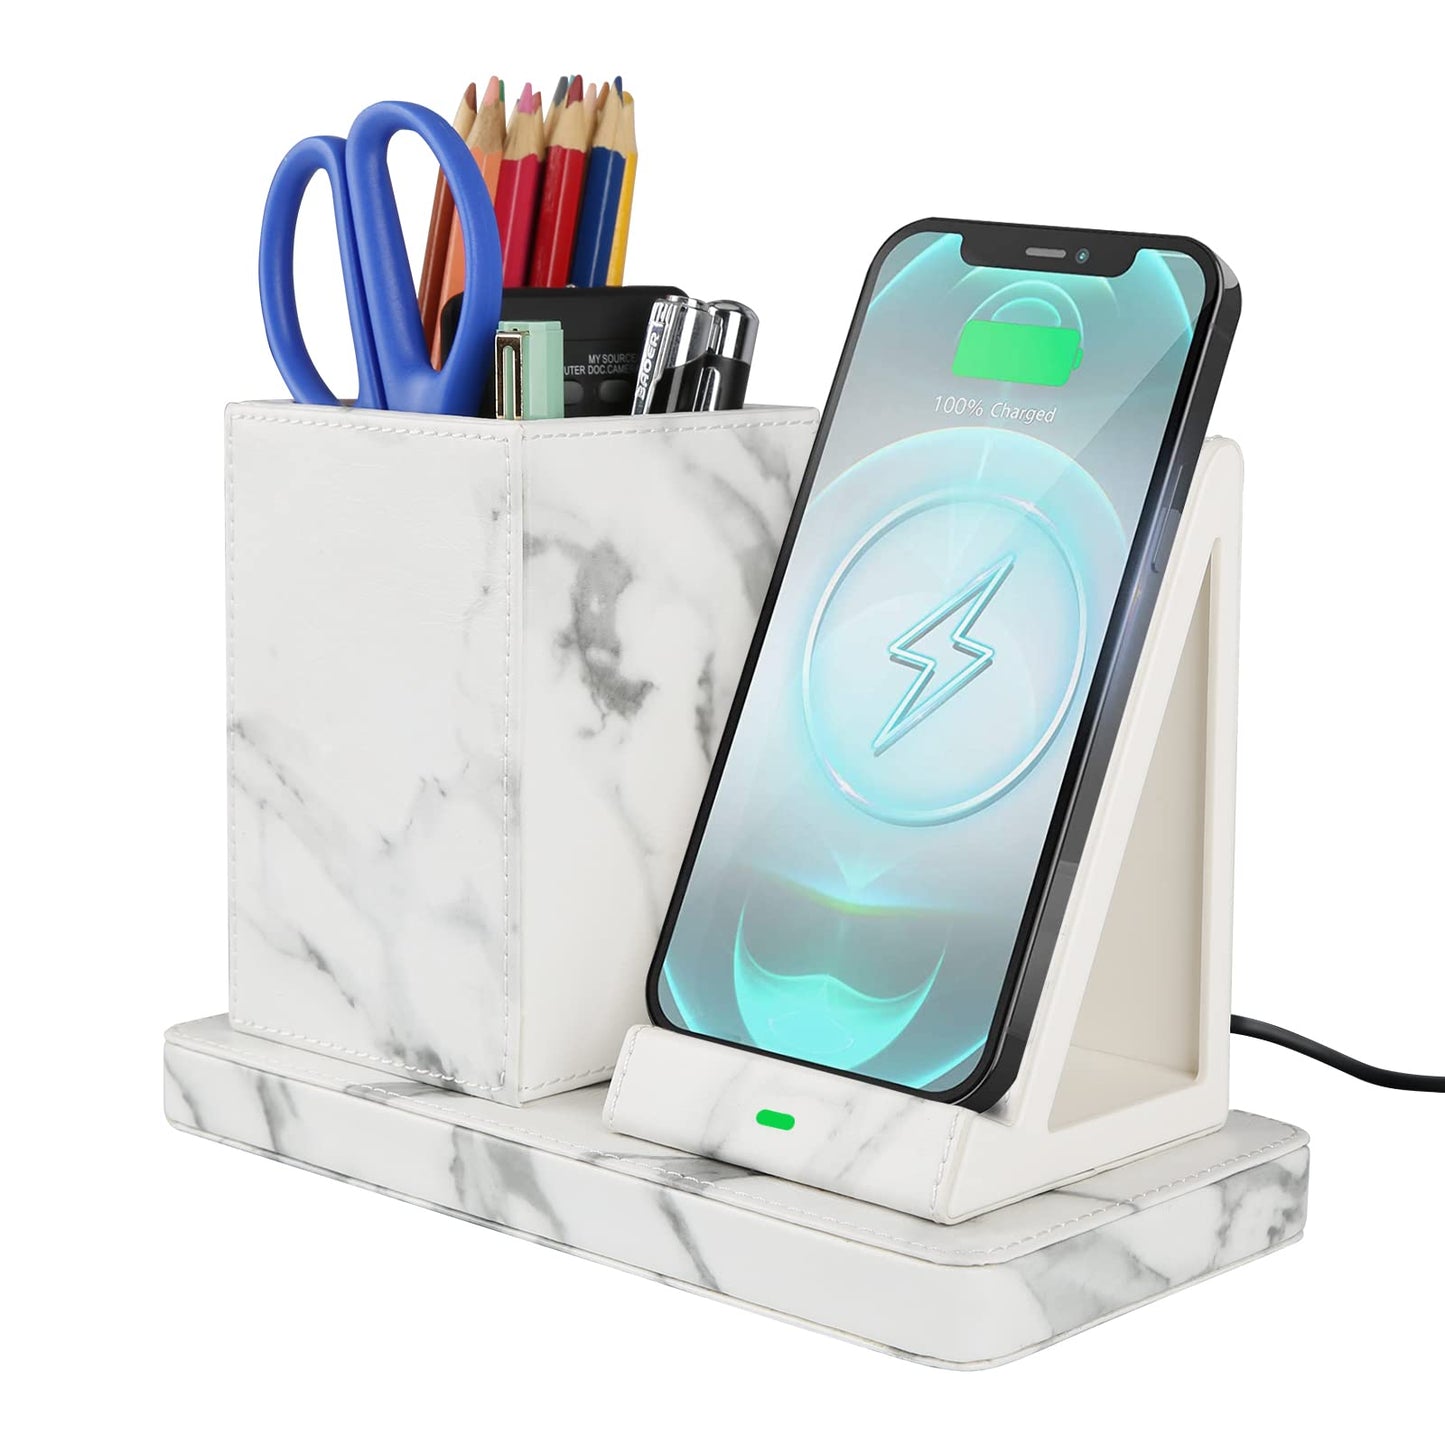 Wireless Charger with Desk Organizer, Wireless Charging Station for iPhone 14/14 Pro/13/12/11/Samsung Galaxy S23/S22/S21/S20/Note 20/Note 10, Wireless Charging Stand with Leather, Black